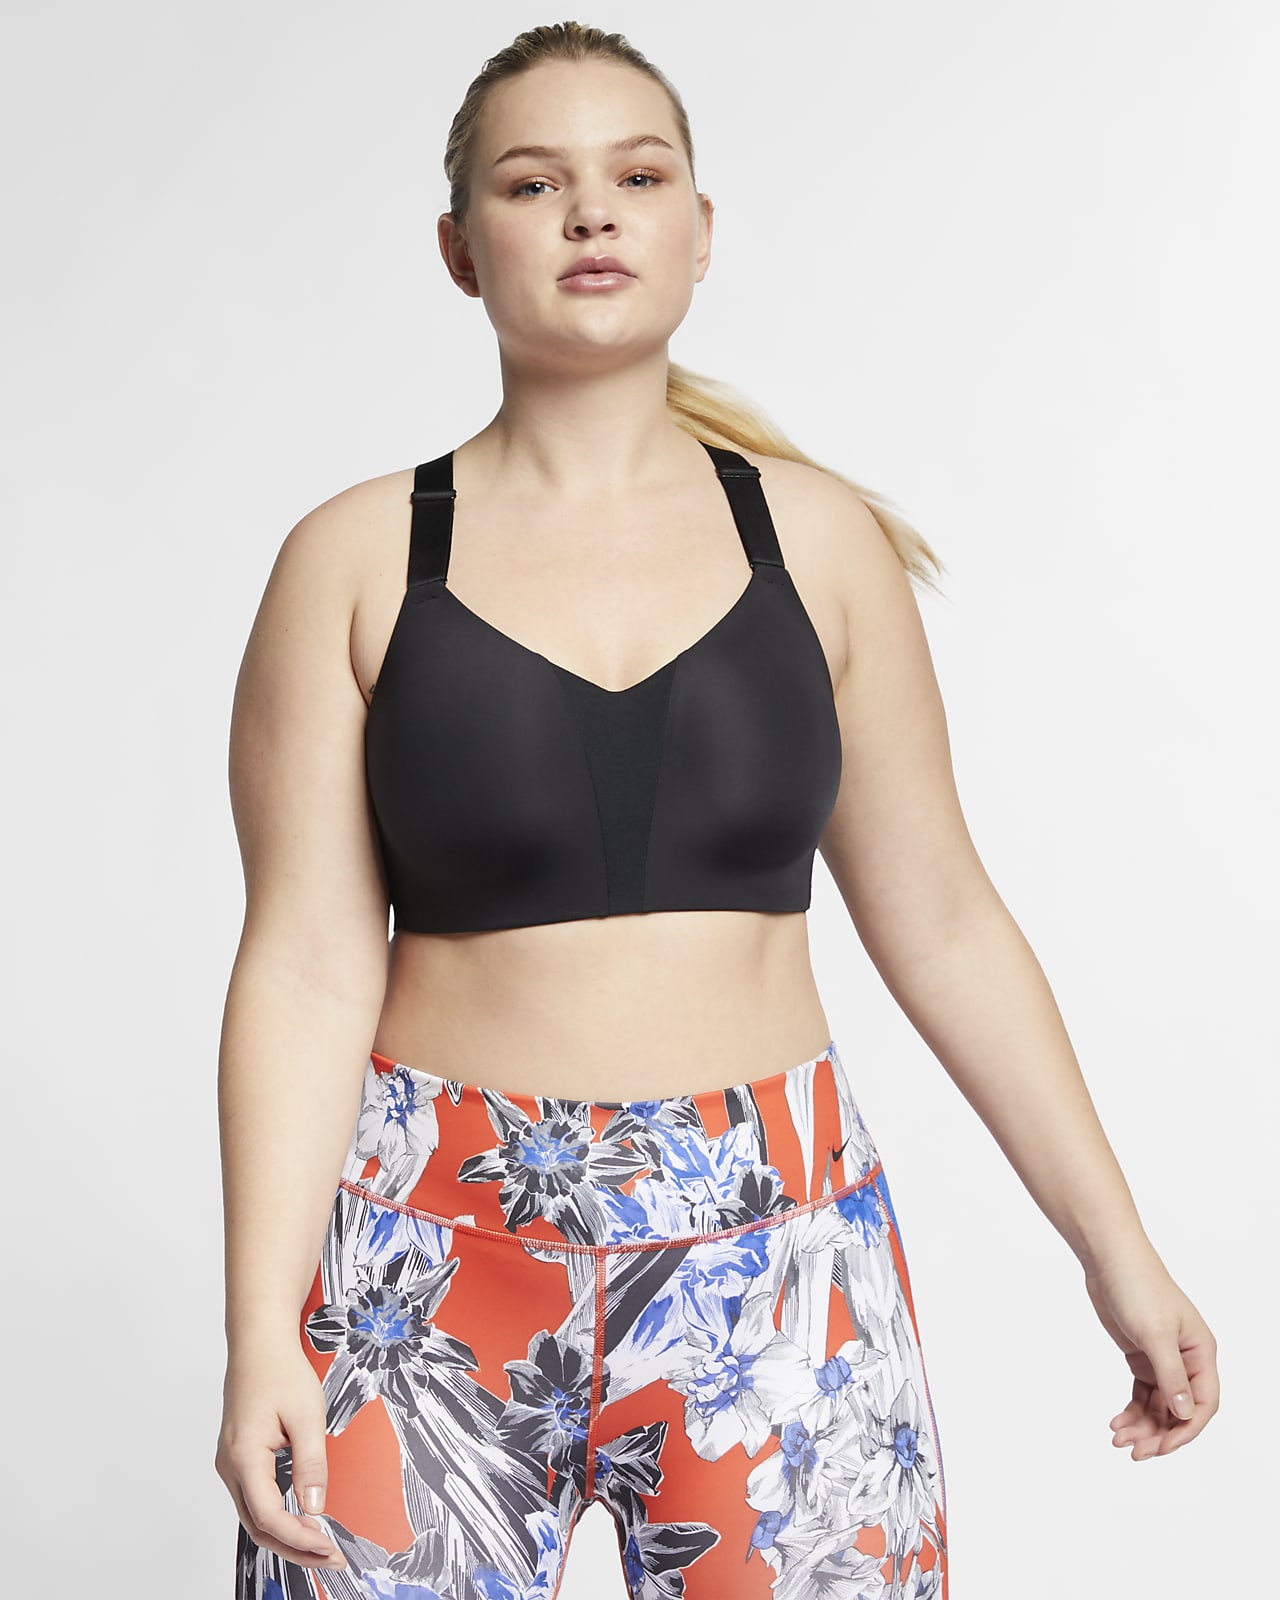 rival bra high support nike